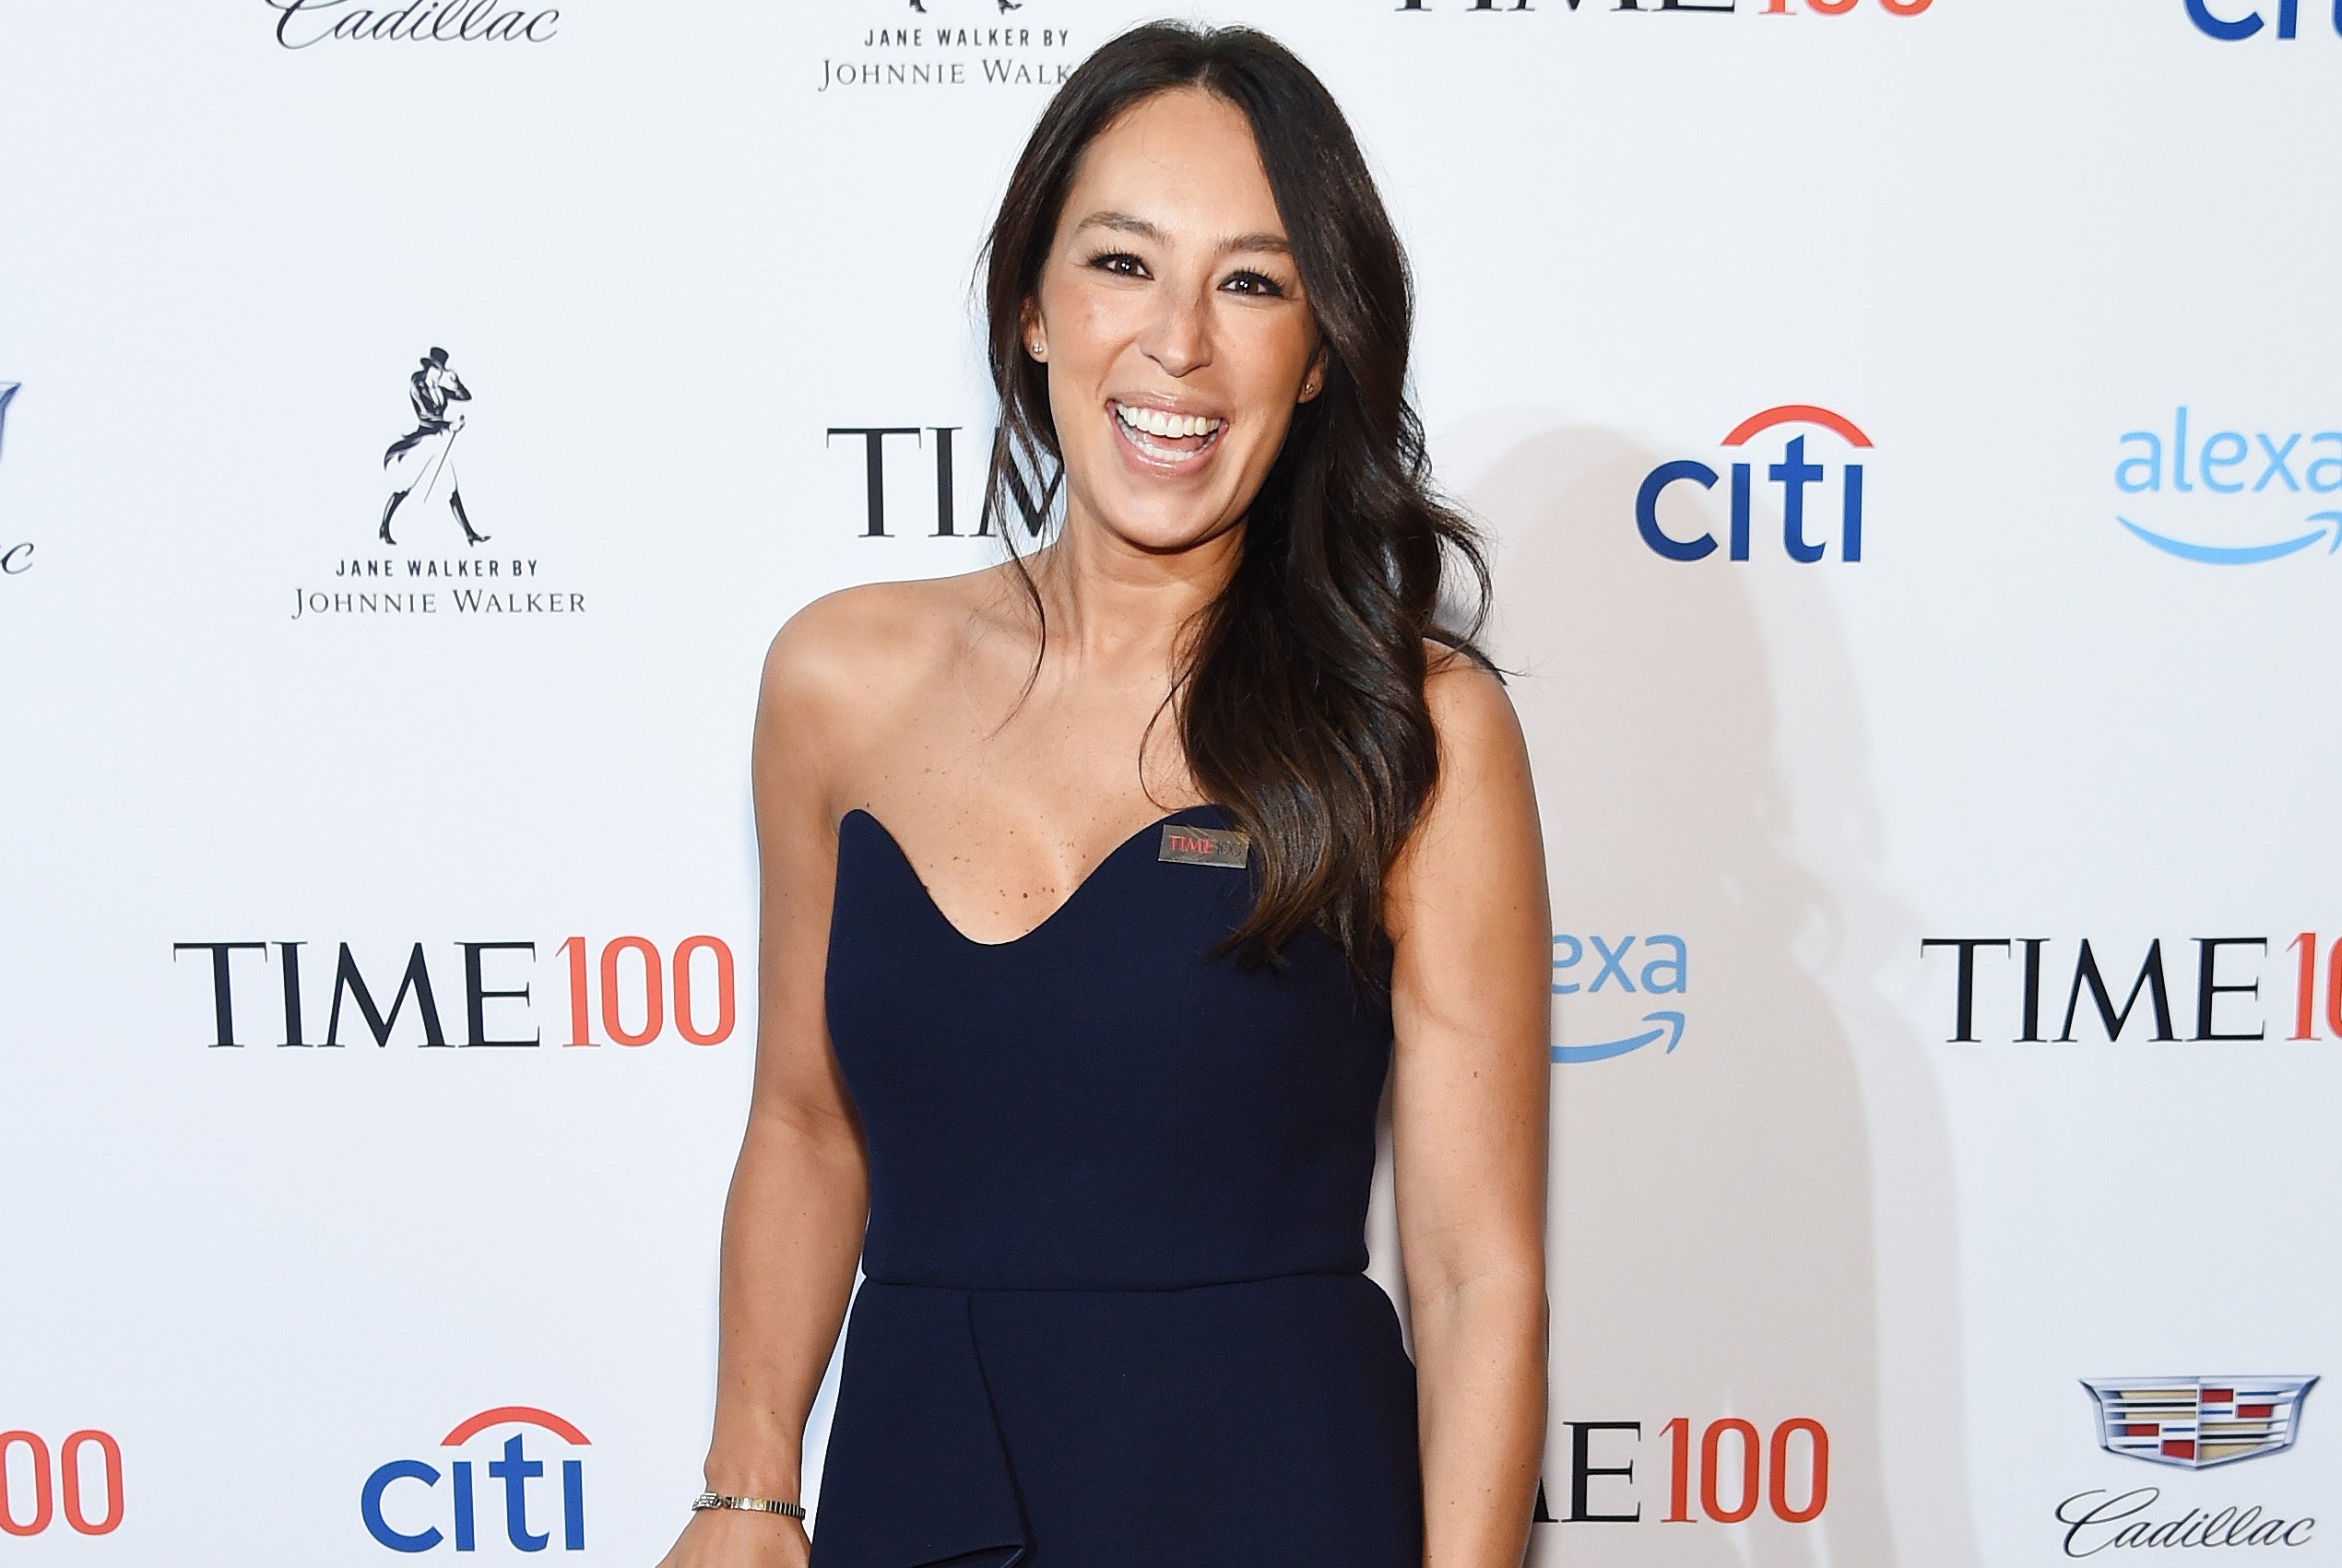 Joanna Gaines attends the TIME 100 Gala 2019 Cocktails at Jazz at Lincoln Center on April 23, 2019.